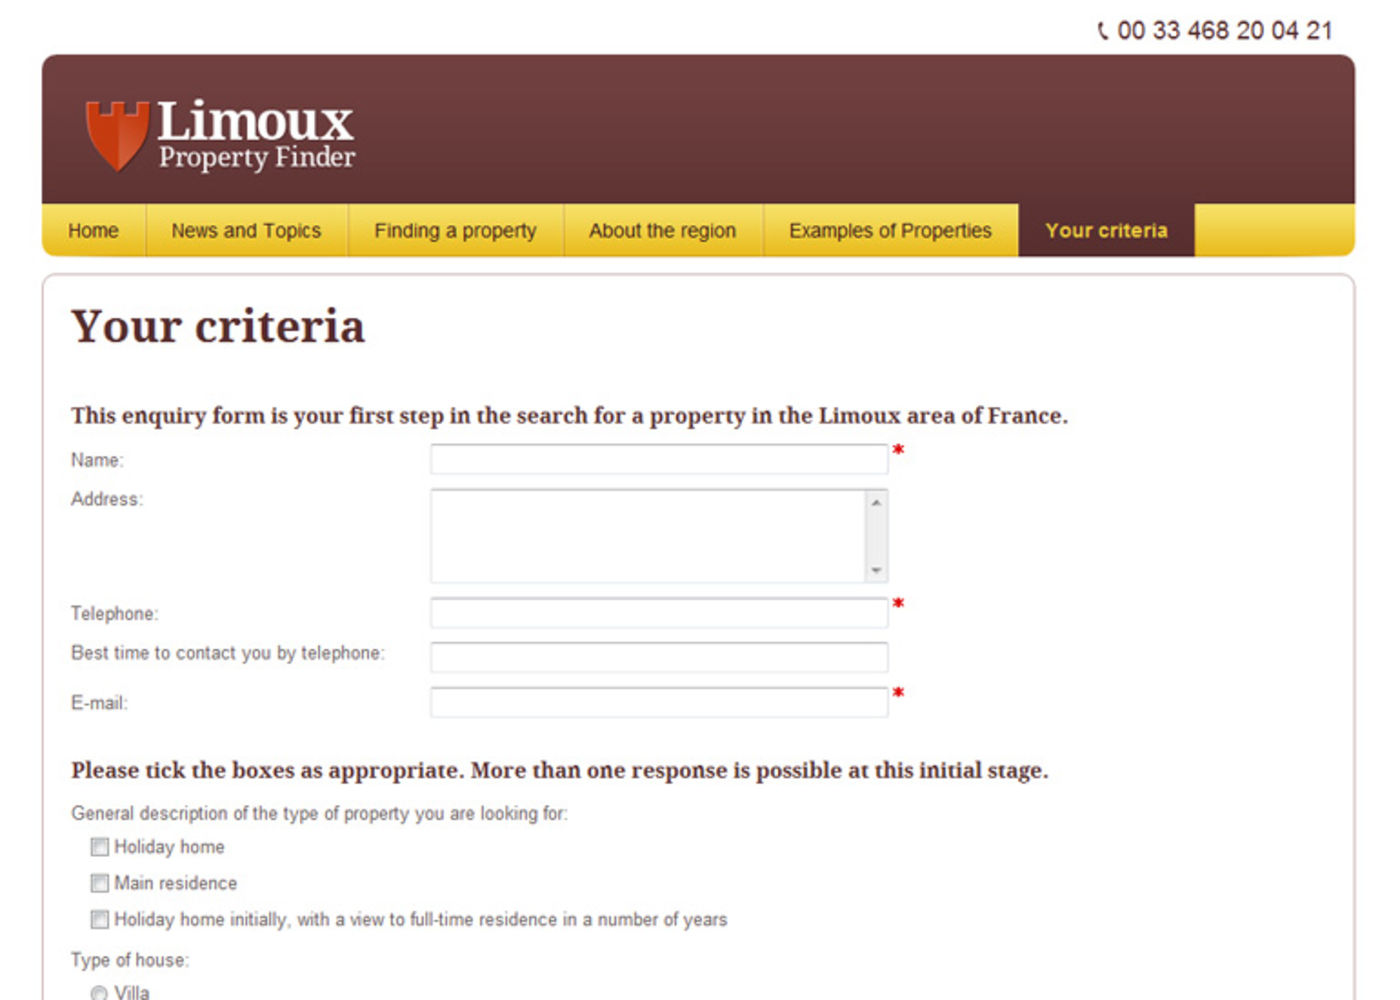 Limoux Property Finder Form - Your criteria